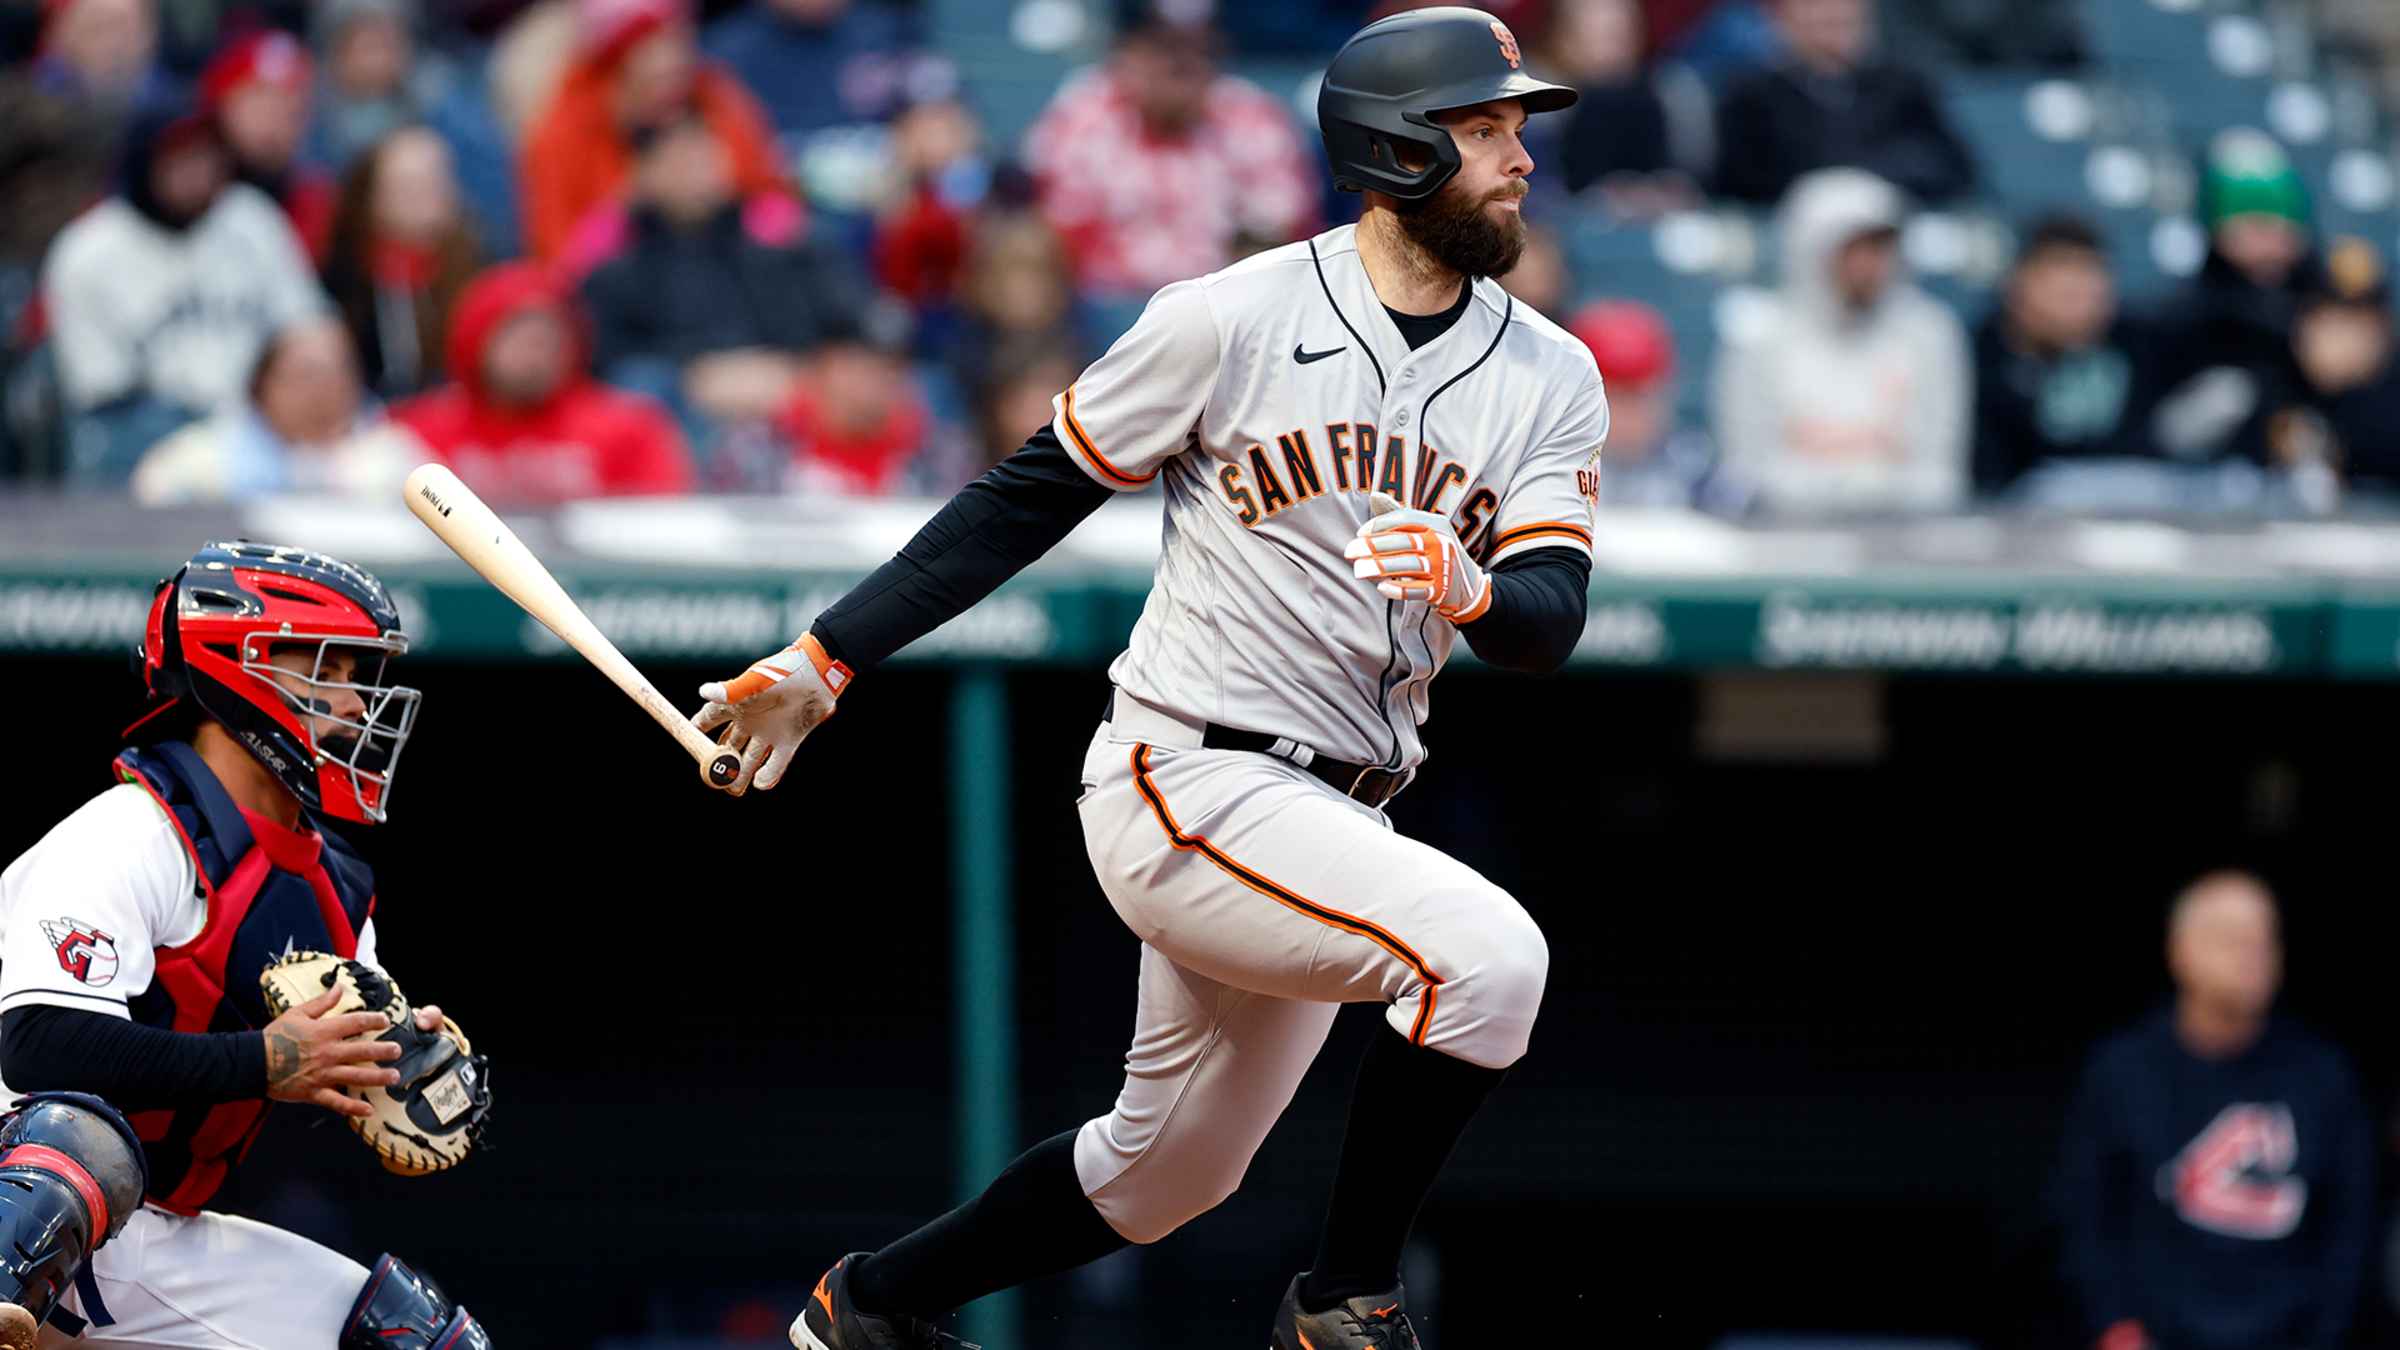 Home sweet home: Brandon Belt staying with San Francisco Giants